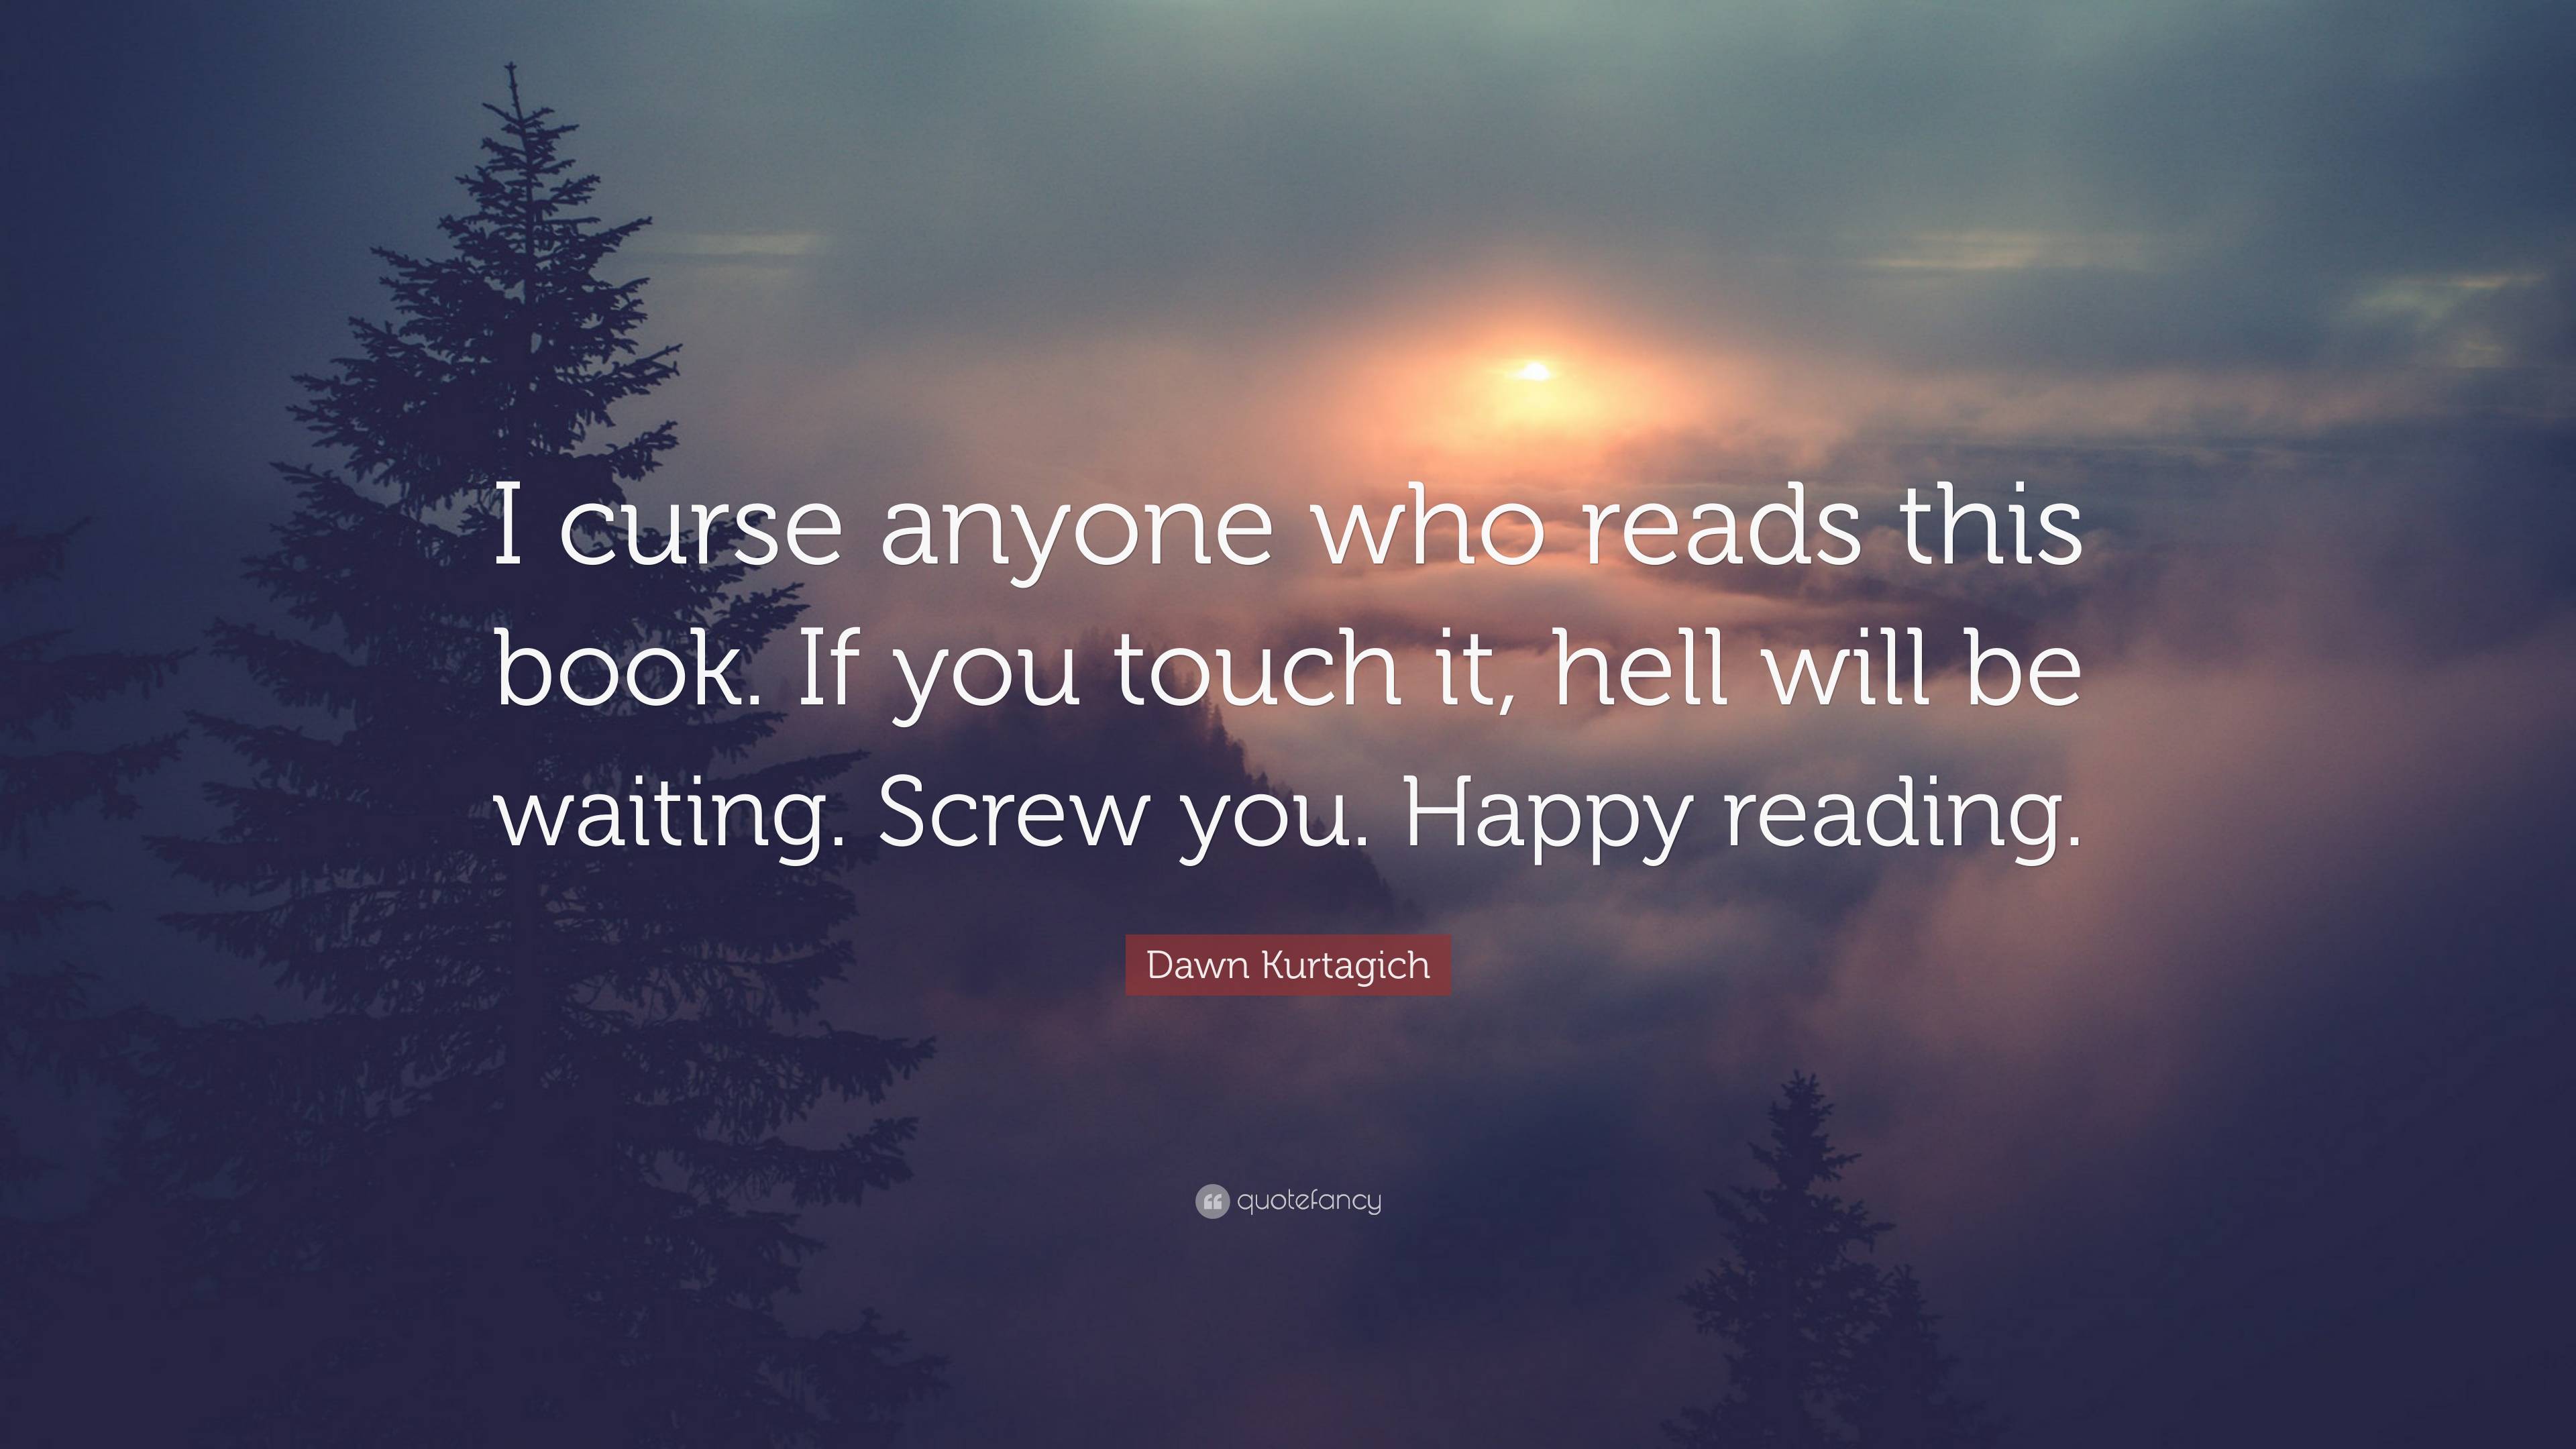 Dawn Kurtagich Quote: “I curse anyone who reads this book. If you touch ...